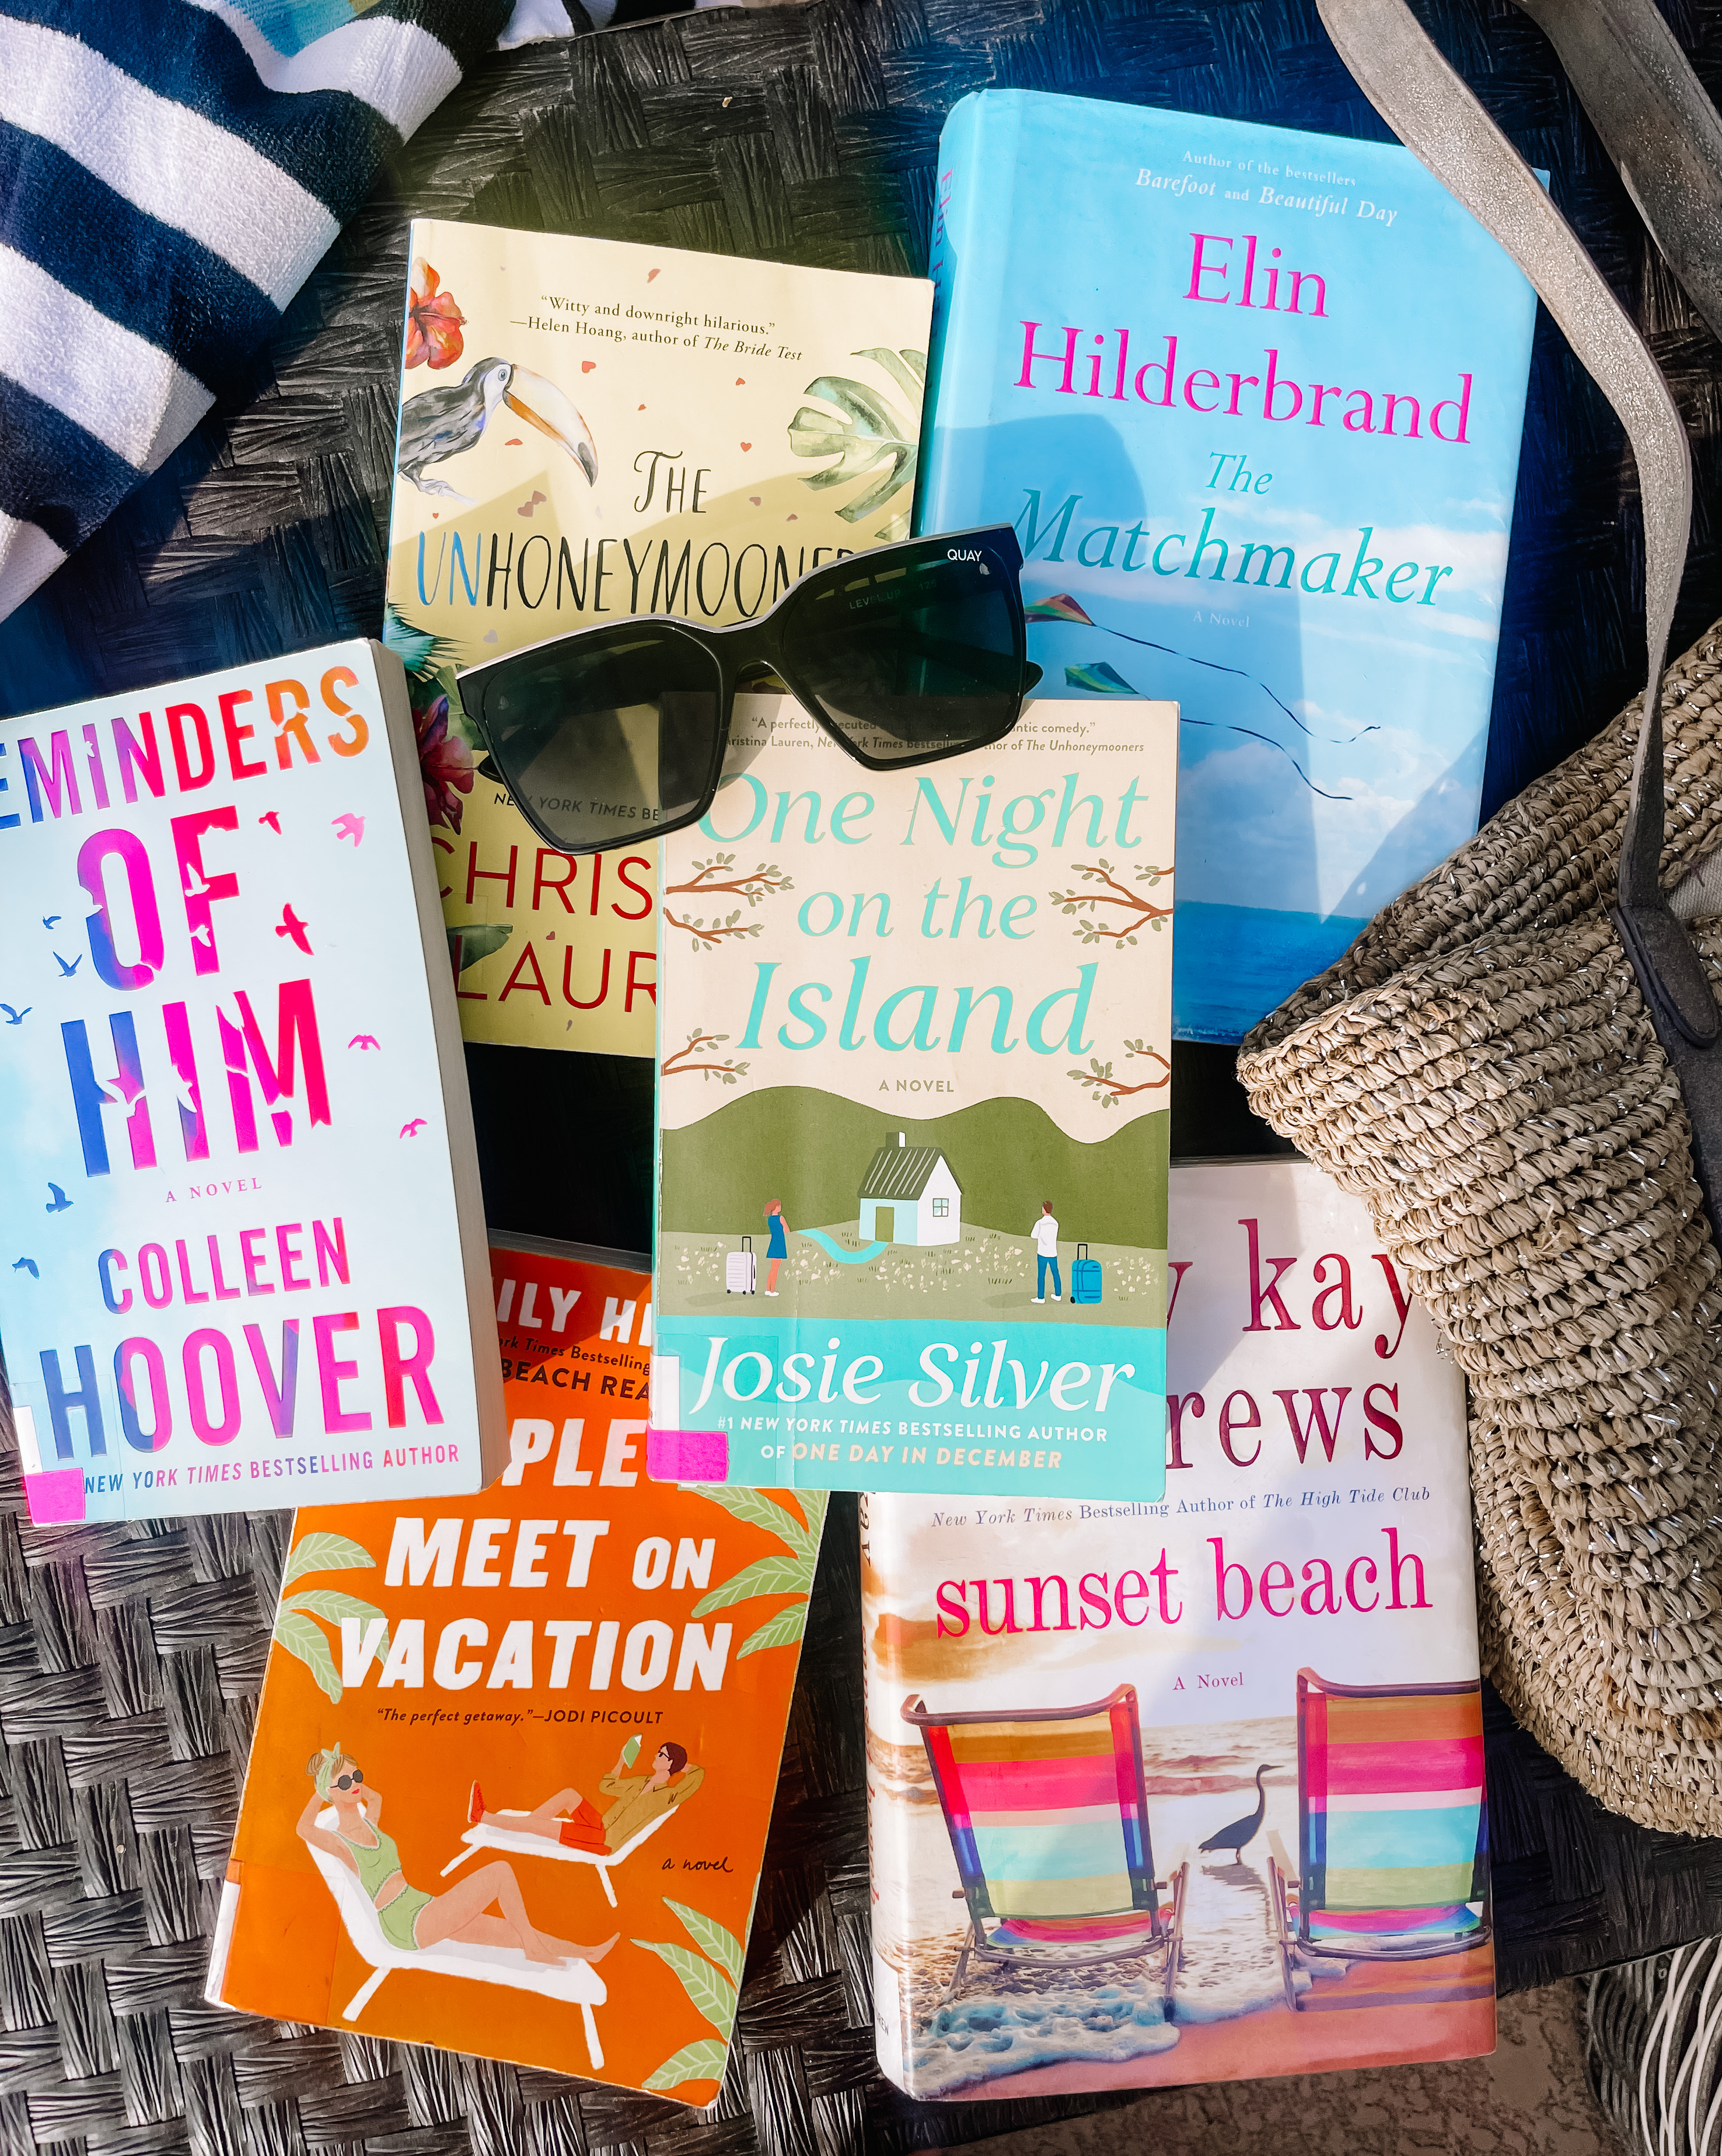 Summer Reading List - This is our Bliss